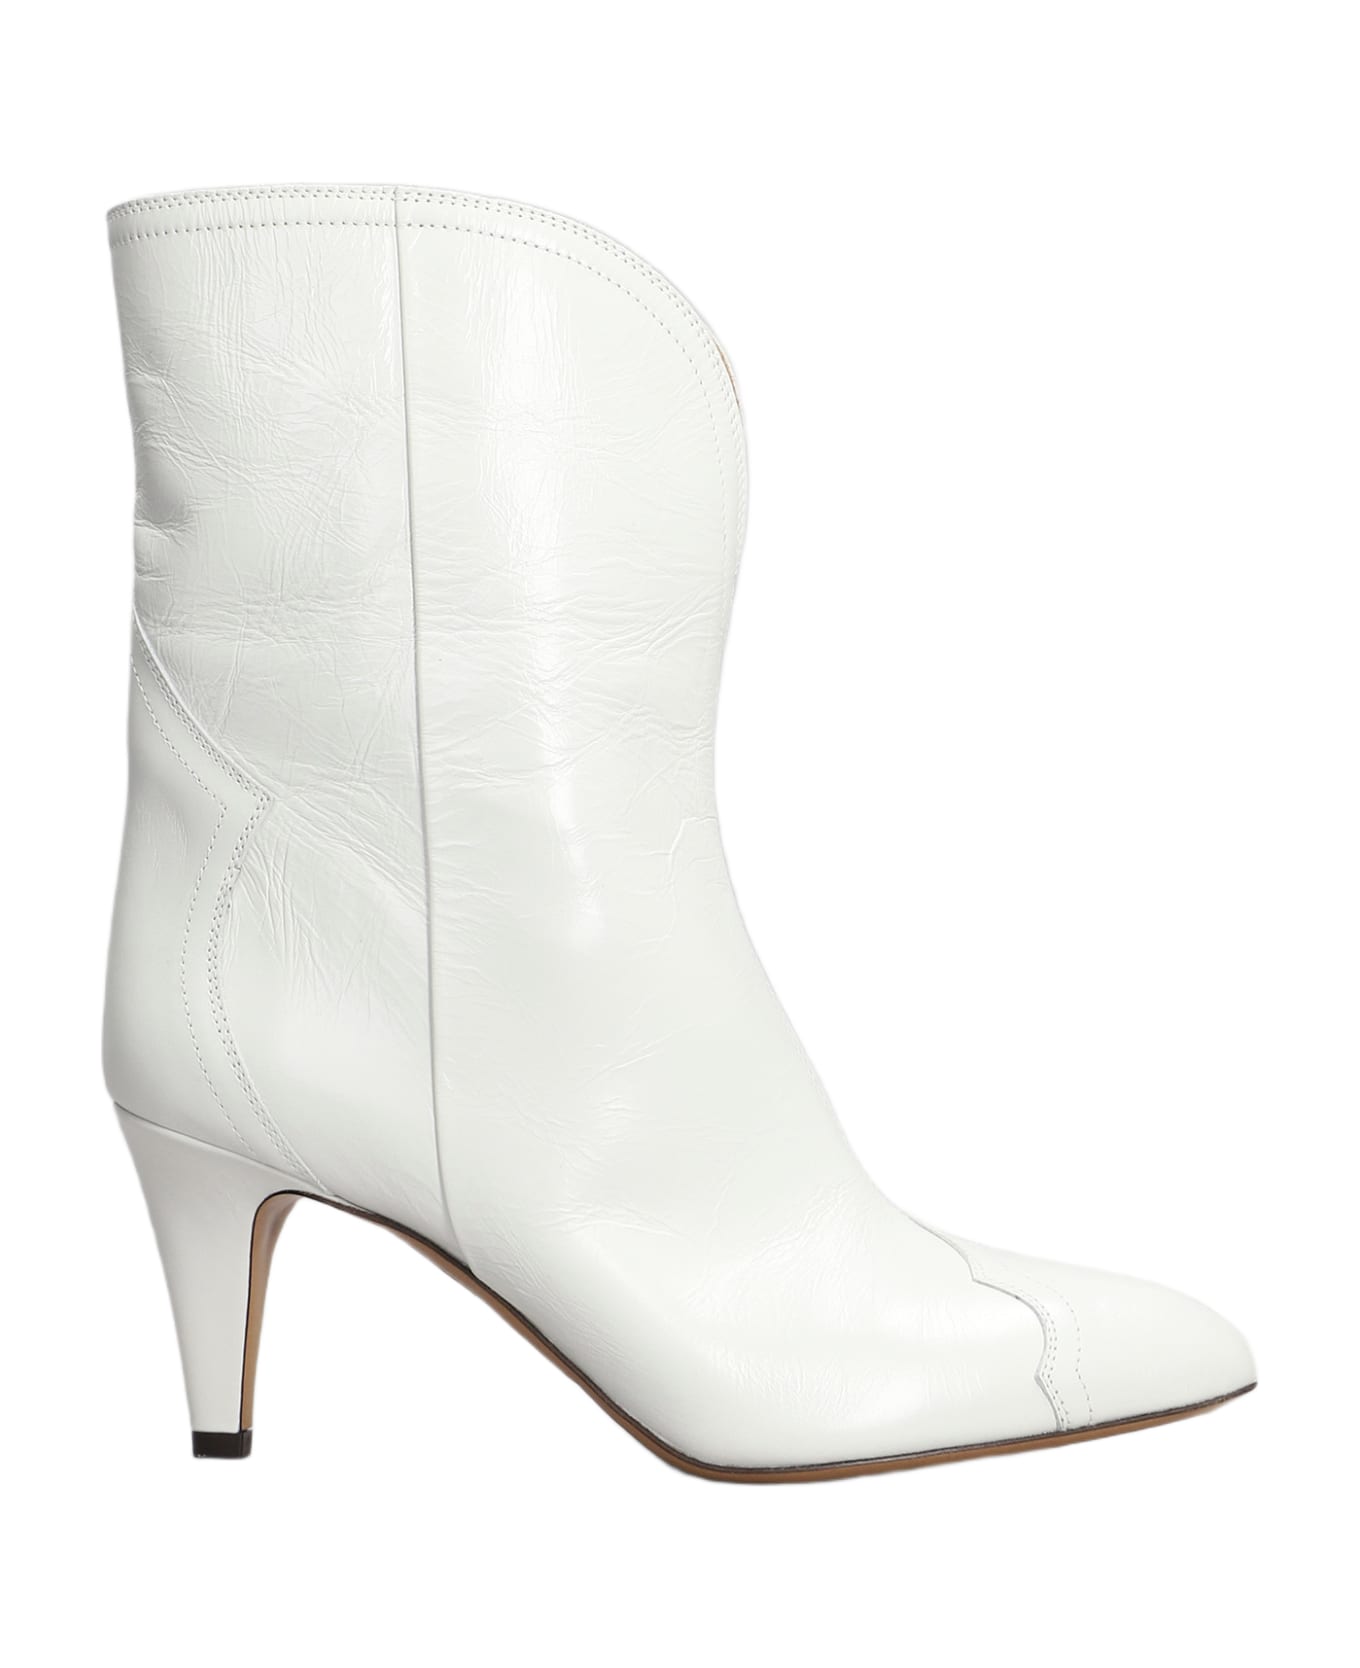 Isabel Marant Dytho High Heels Ankle Boots - WHITE